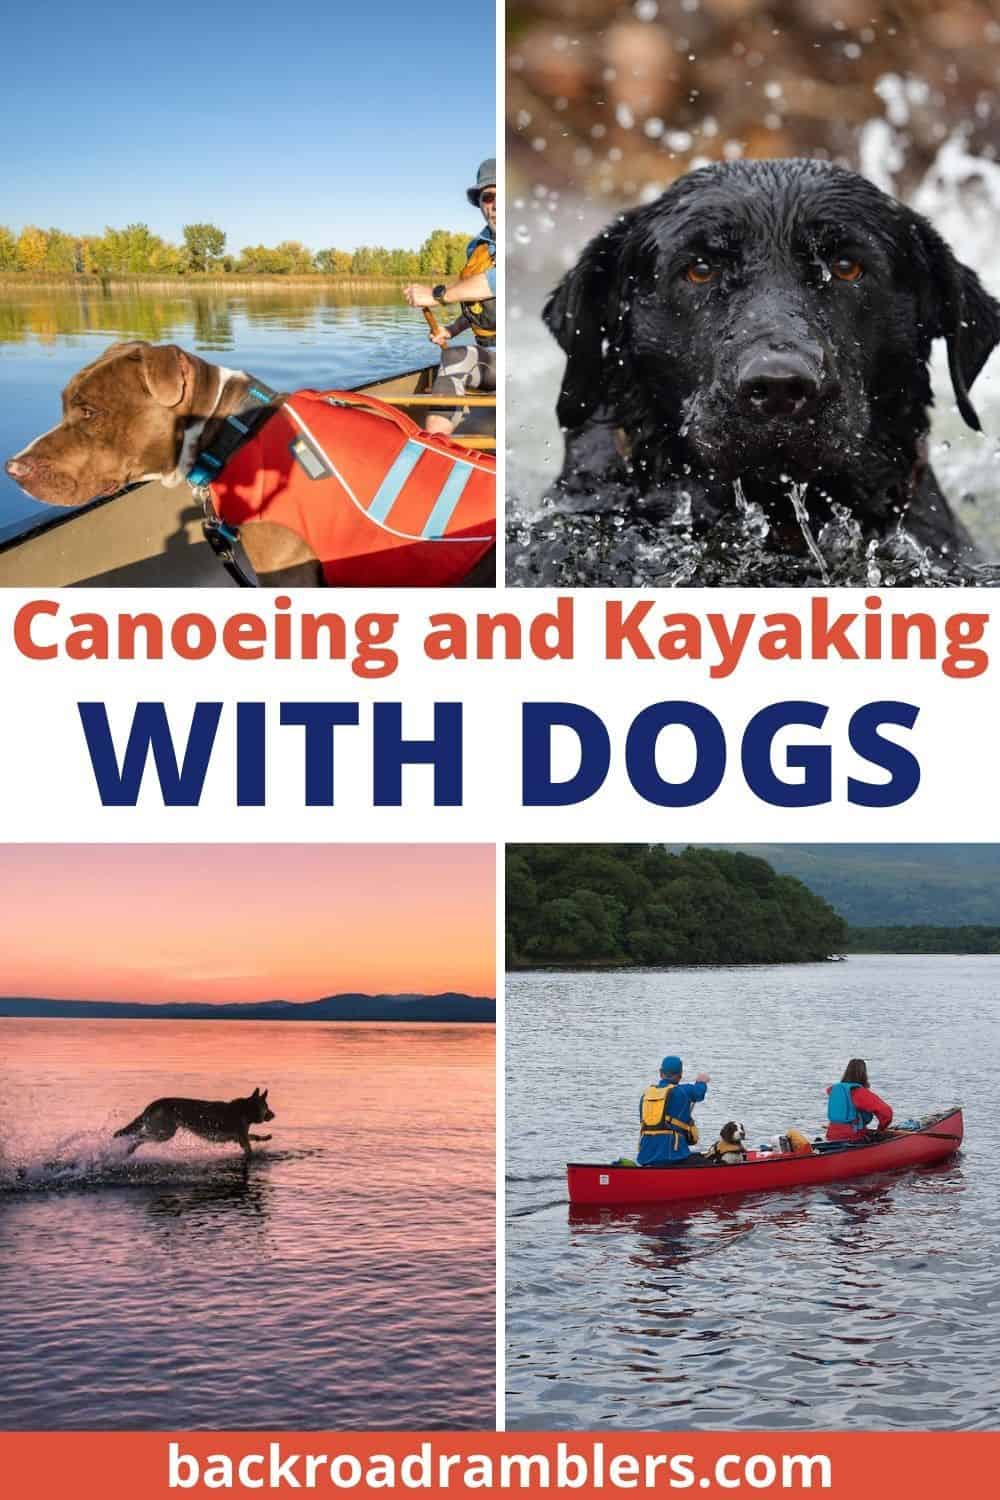 A collage of photos featuring dogs in kayaks and canoes. Text overlay: Canoeing and Kayaking with Dogs.